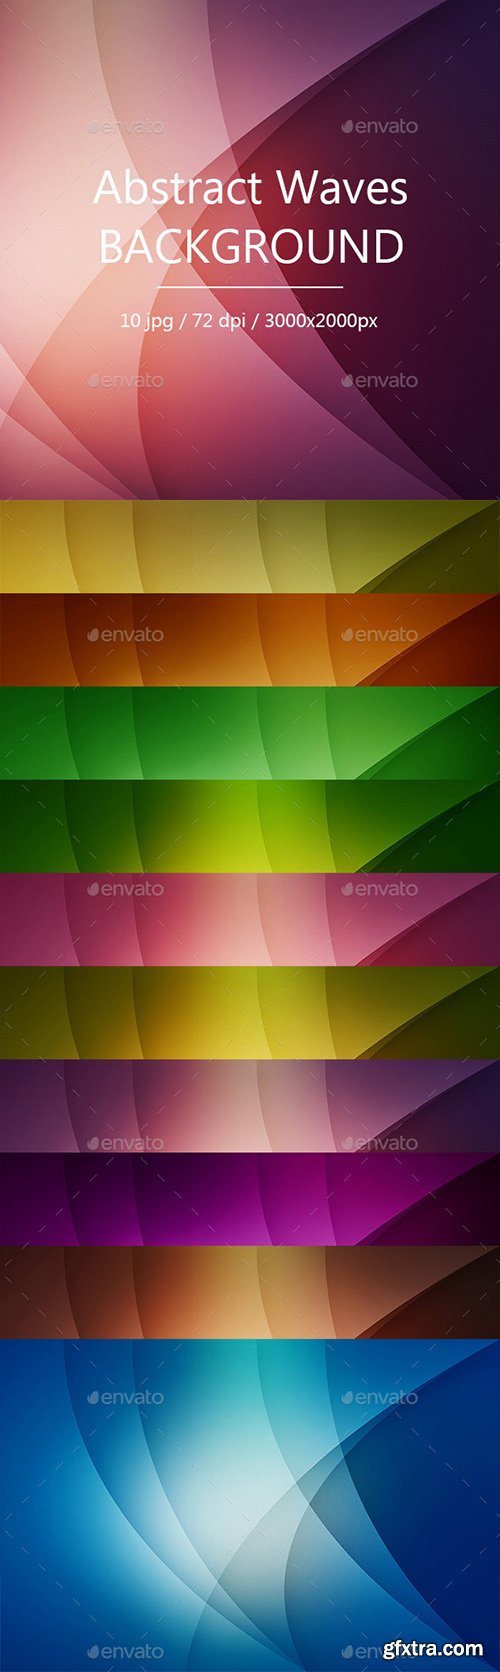 Graphicriver Abstract Waves Backgrounds 17375510